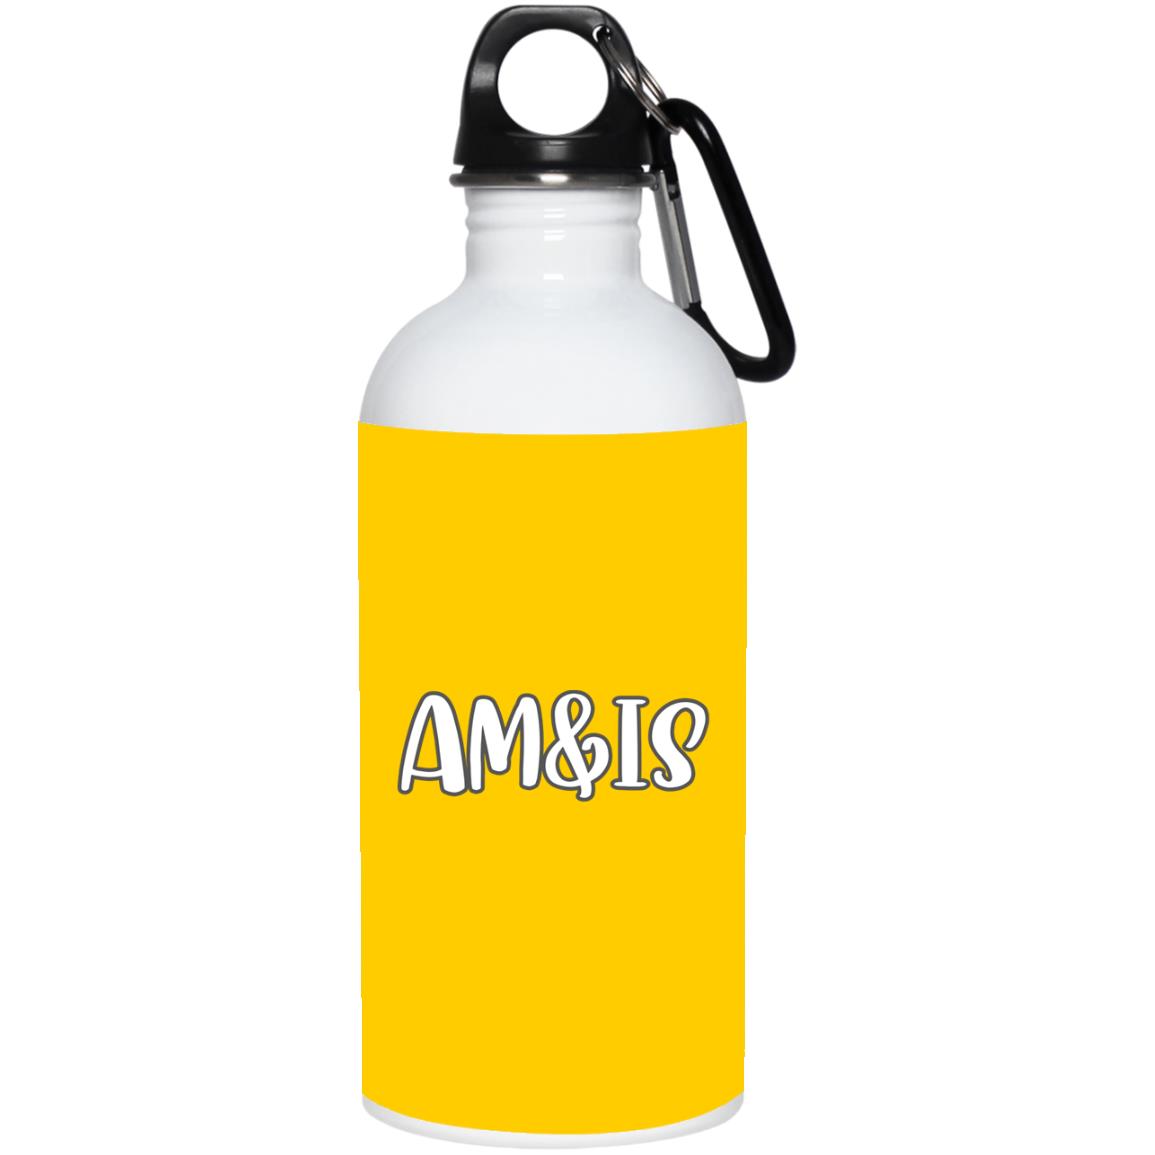 ATHLETIC GOLD ONE SIZE - AM&IS Activewear 20 oz. Stainless Steel Water Bottle - Drinkware at TFC&H Co.